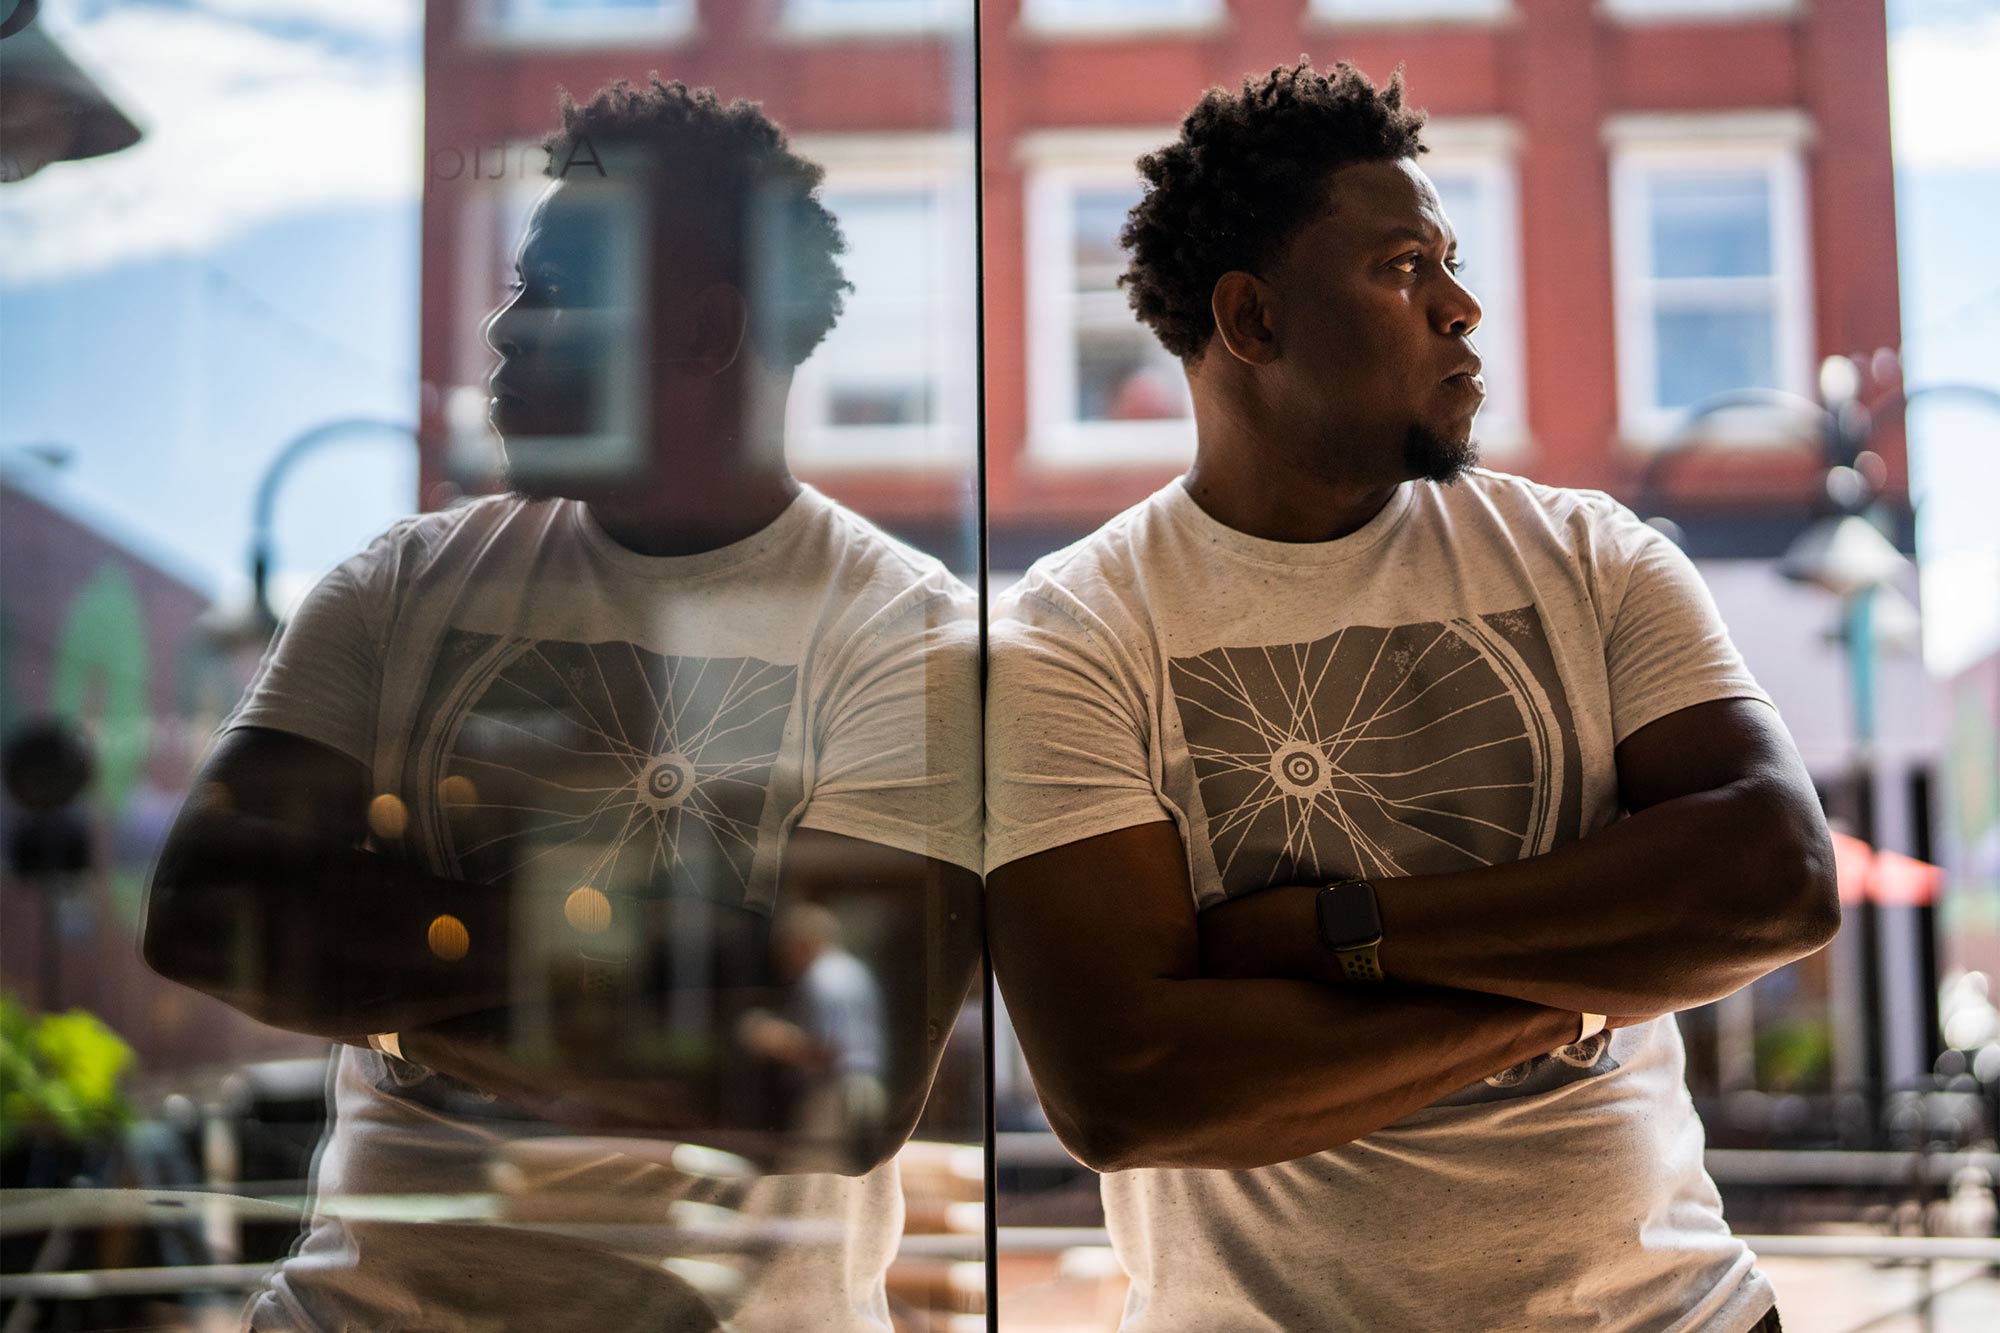 Eze Amos leans against a glass window, his reflection clear on the left.